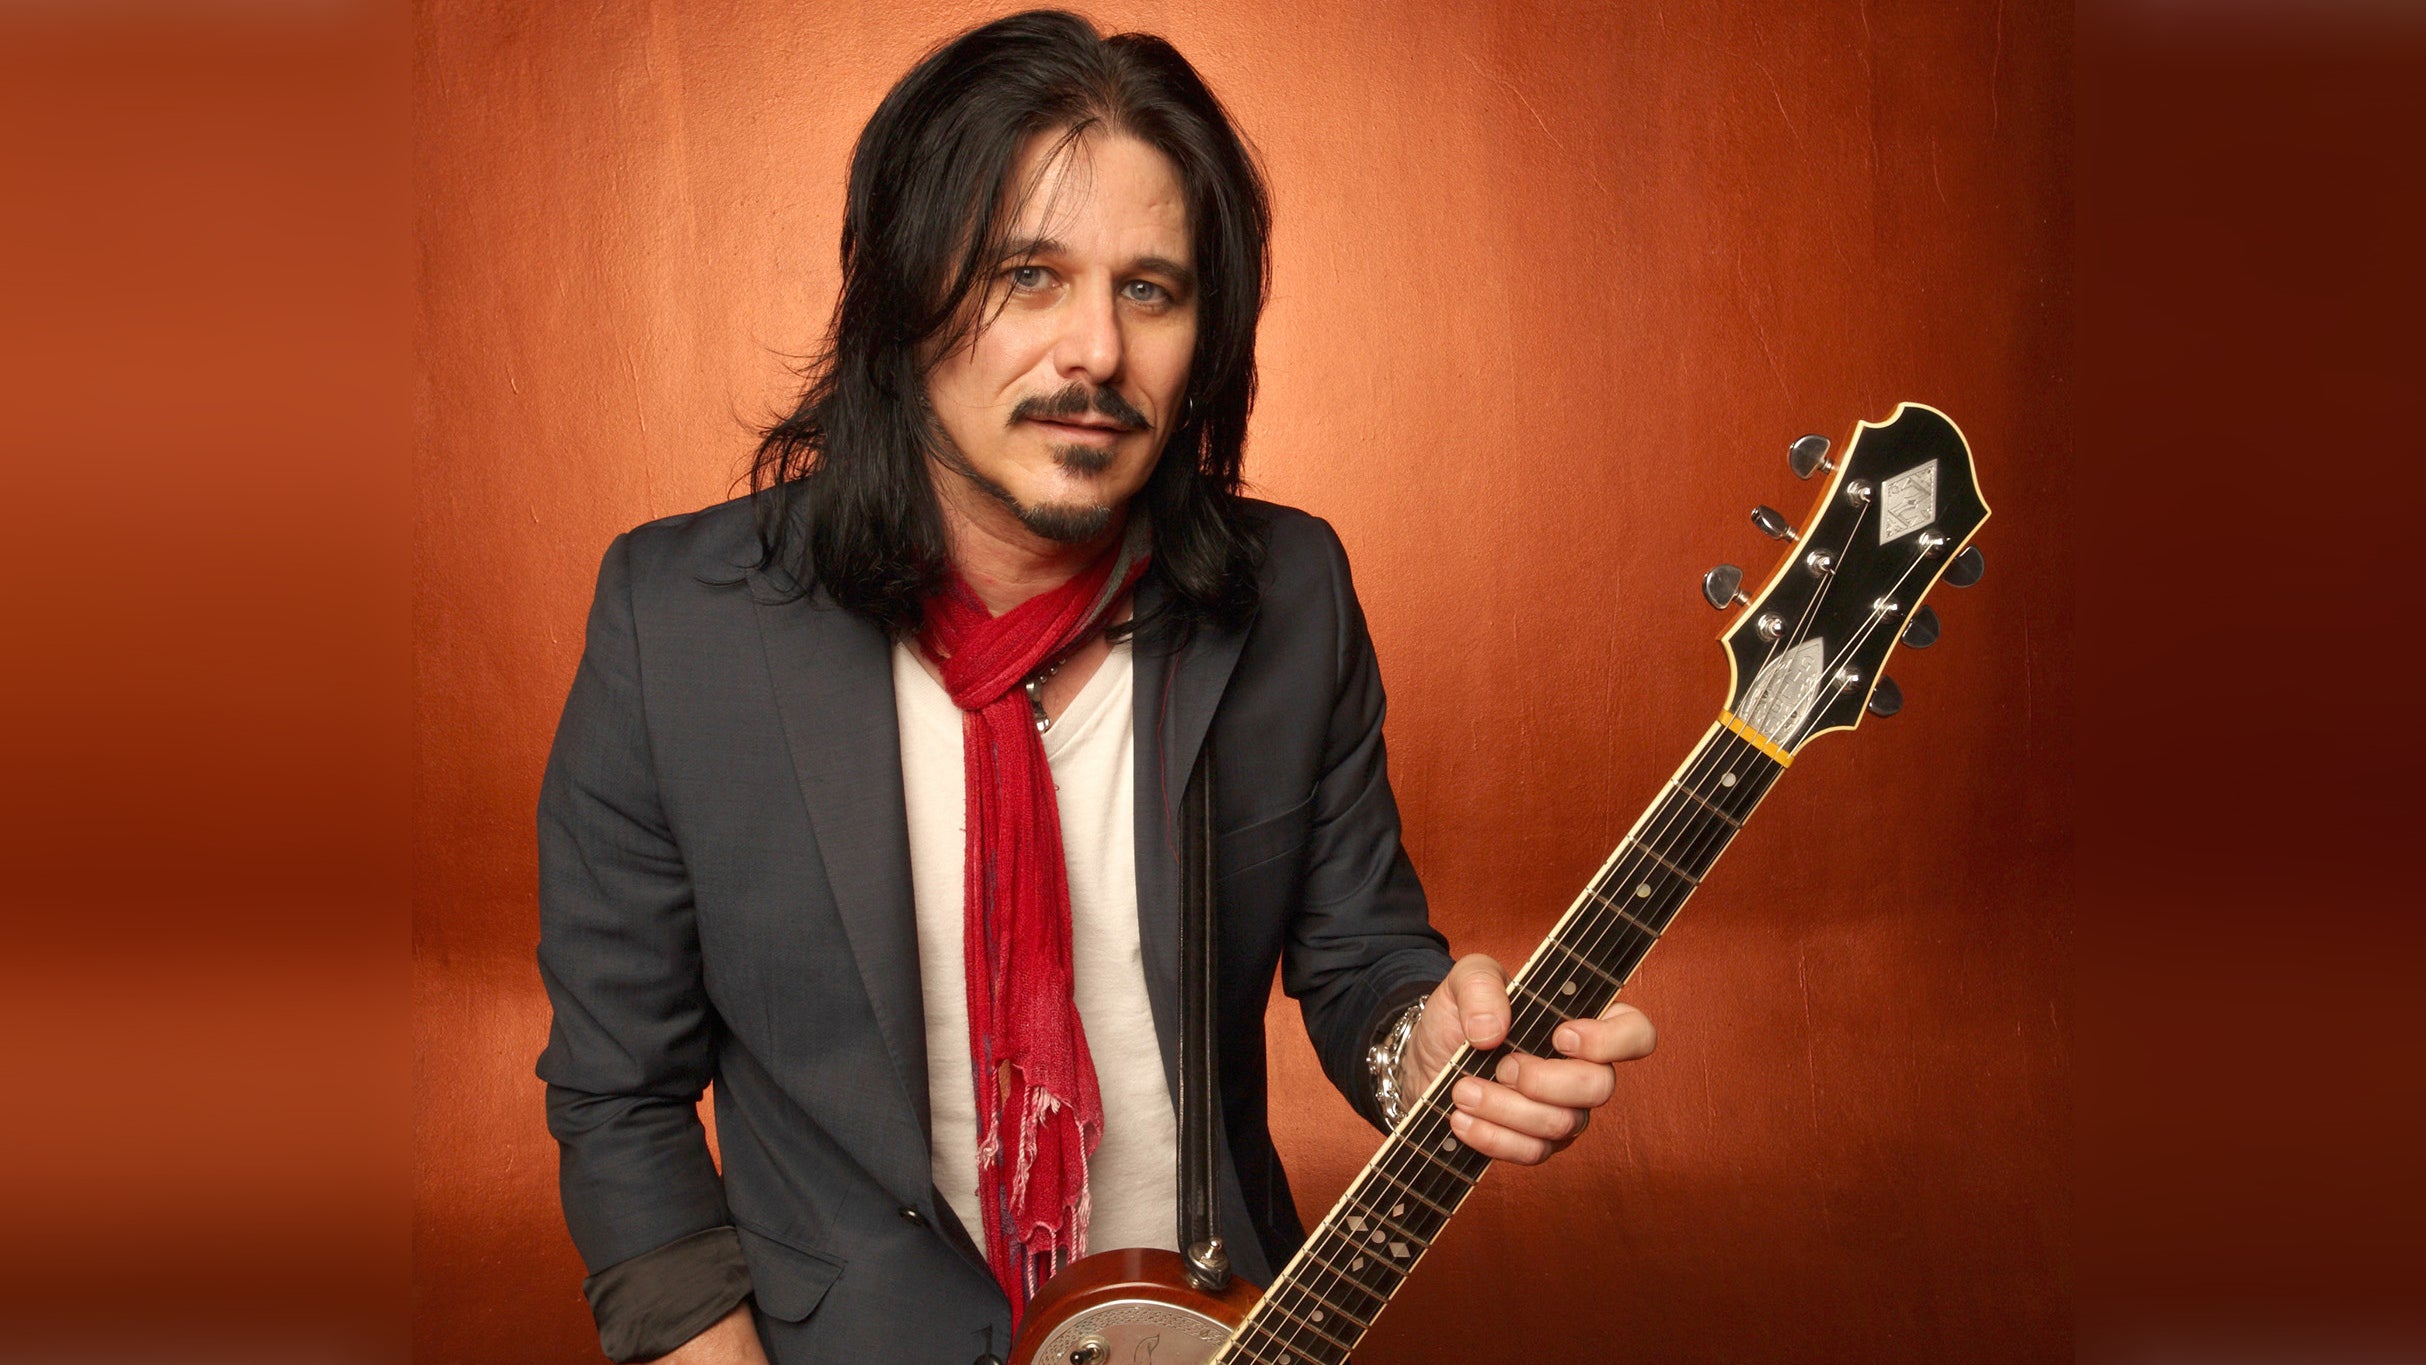 Gilby Clarke at Dick Howser Stadium